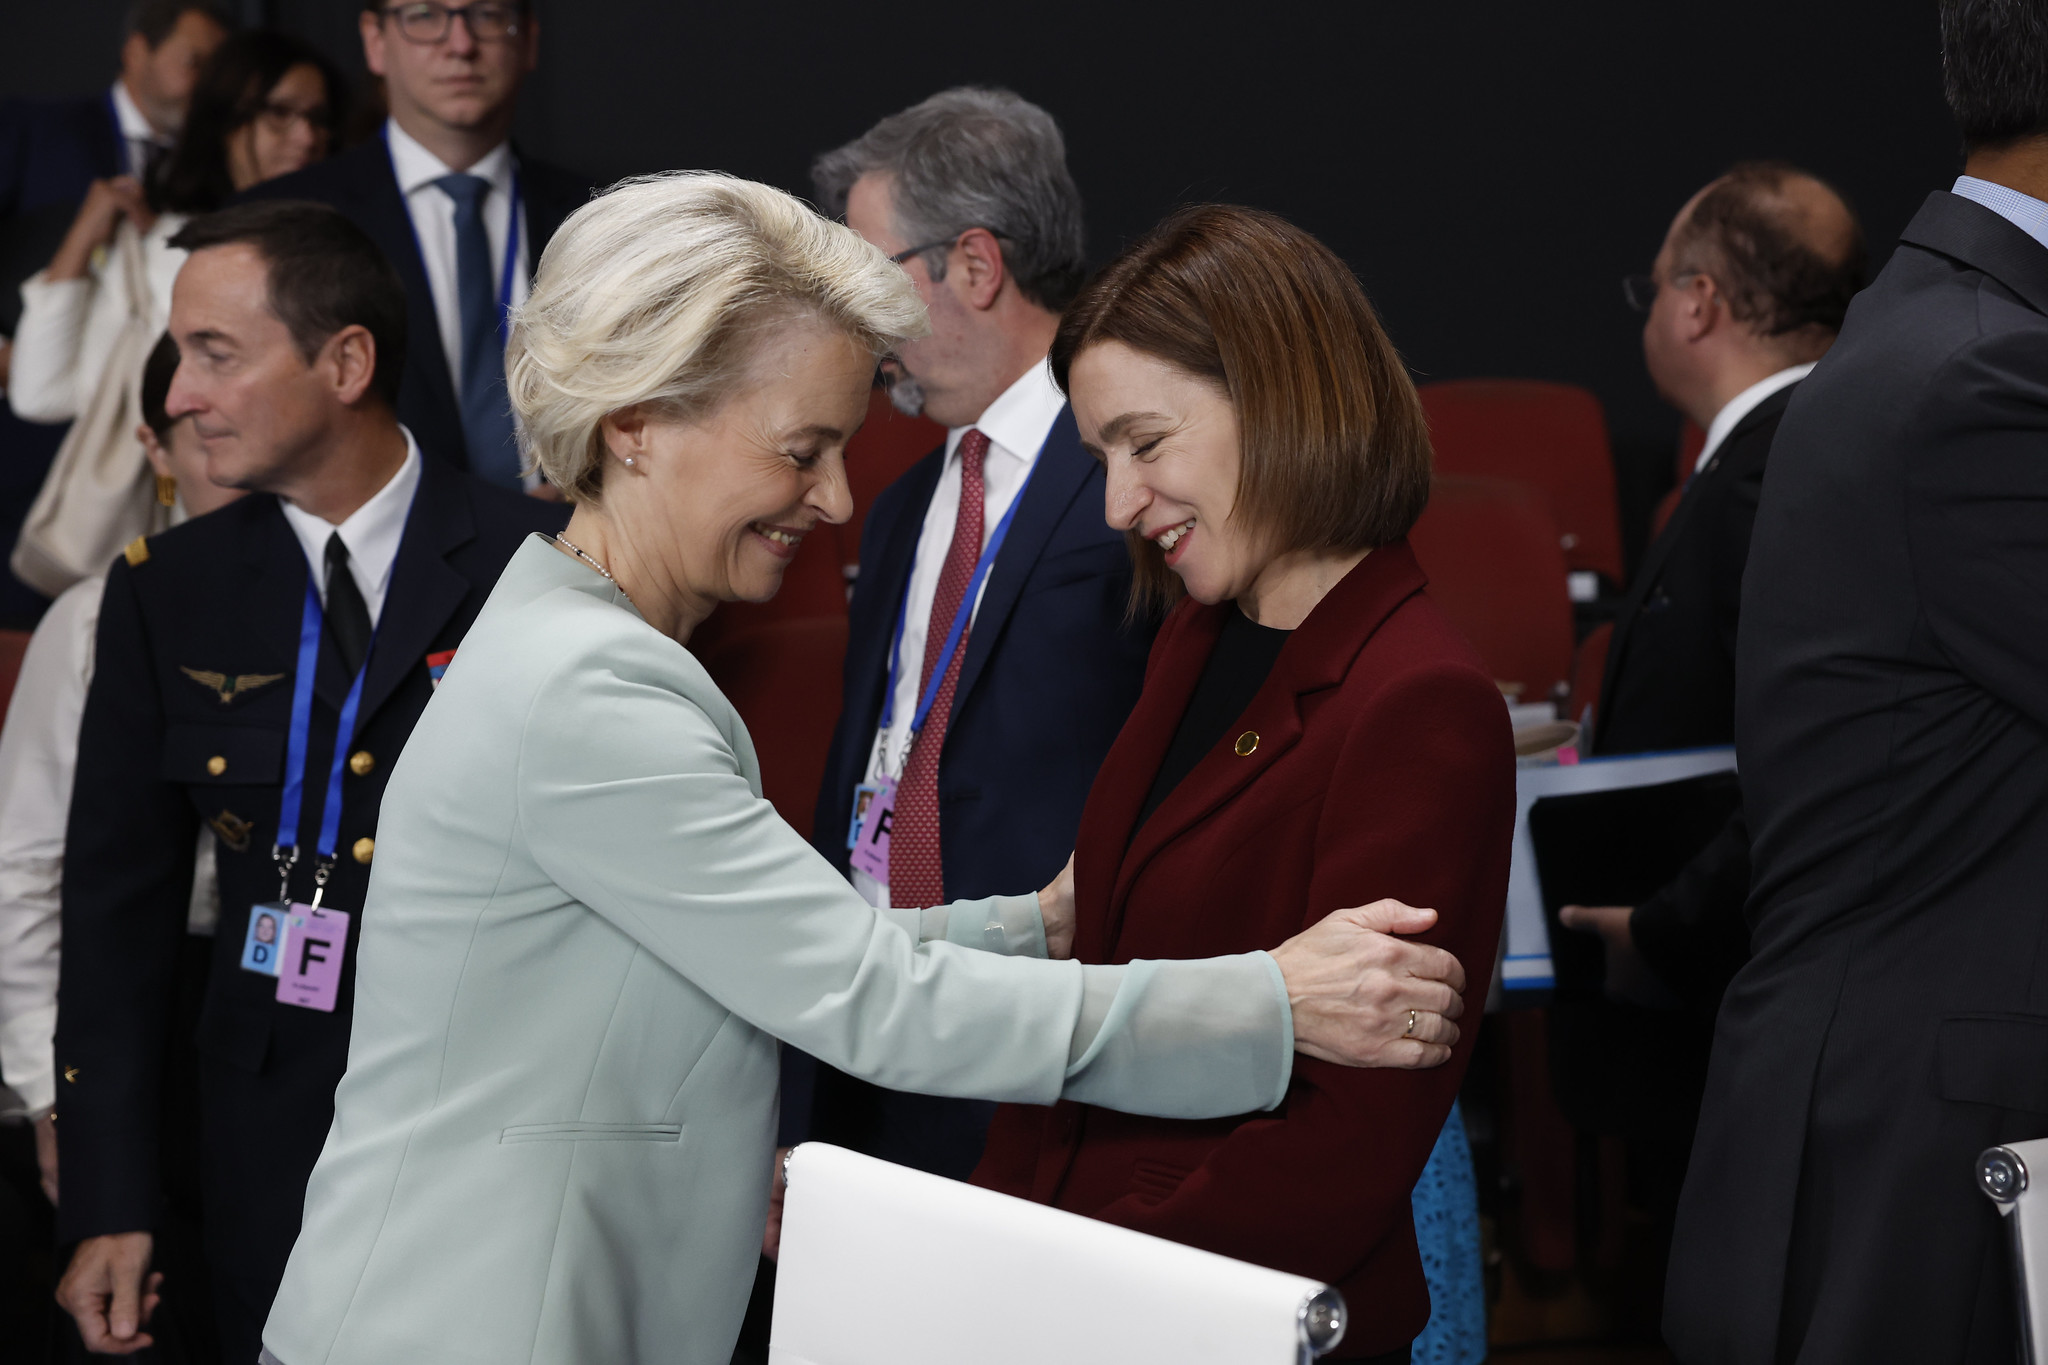 European Commission President Ursula Von der Leyen and Moldova's President Maia Sandu attend the working session of the Meeting of the European Political Community in Granada, Spain on 5 October 2023. © Pool PEUE/ Juanjo Martín via Flickr